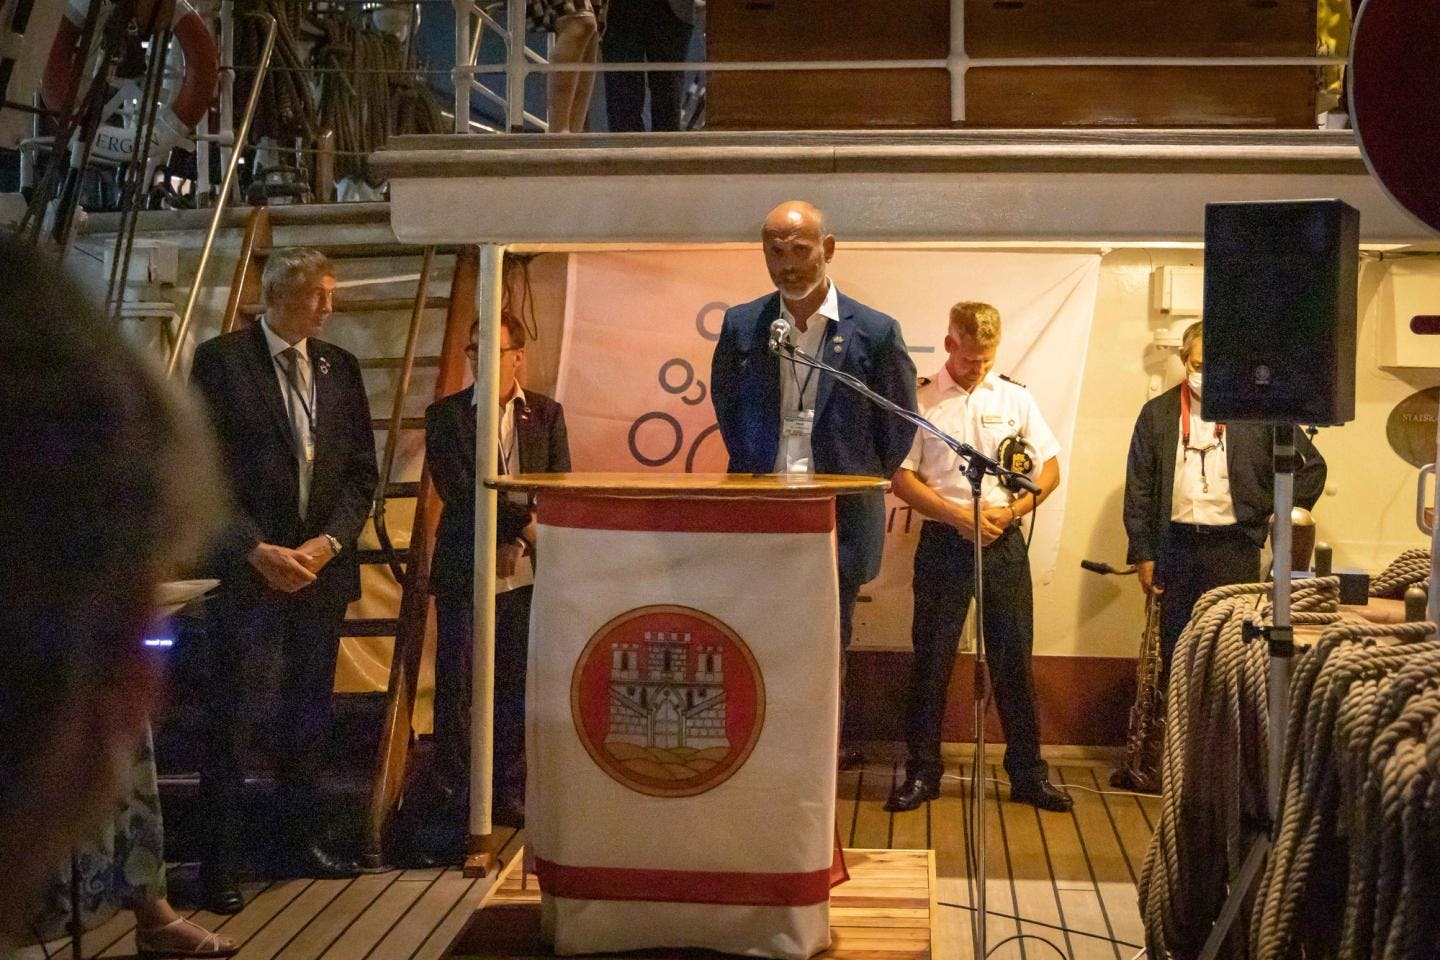 Haakon Vatle, director of the Lehmkuhl Foundation and expedition leader for the circumnavigation, also gave a speech during the reception.  Photo: André Marton Pedersen